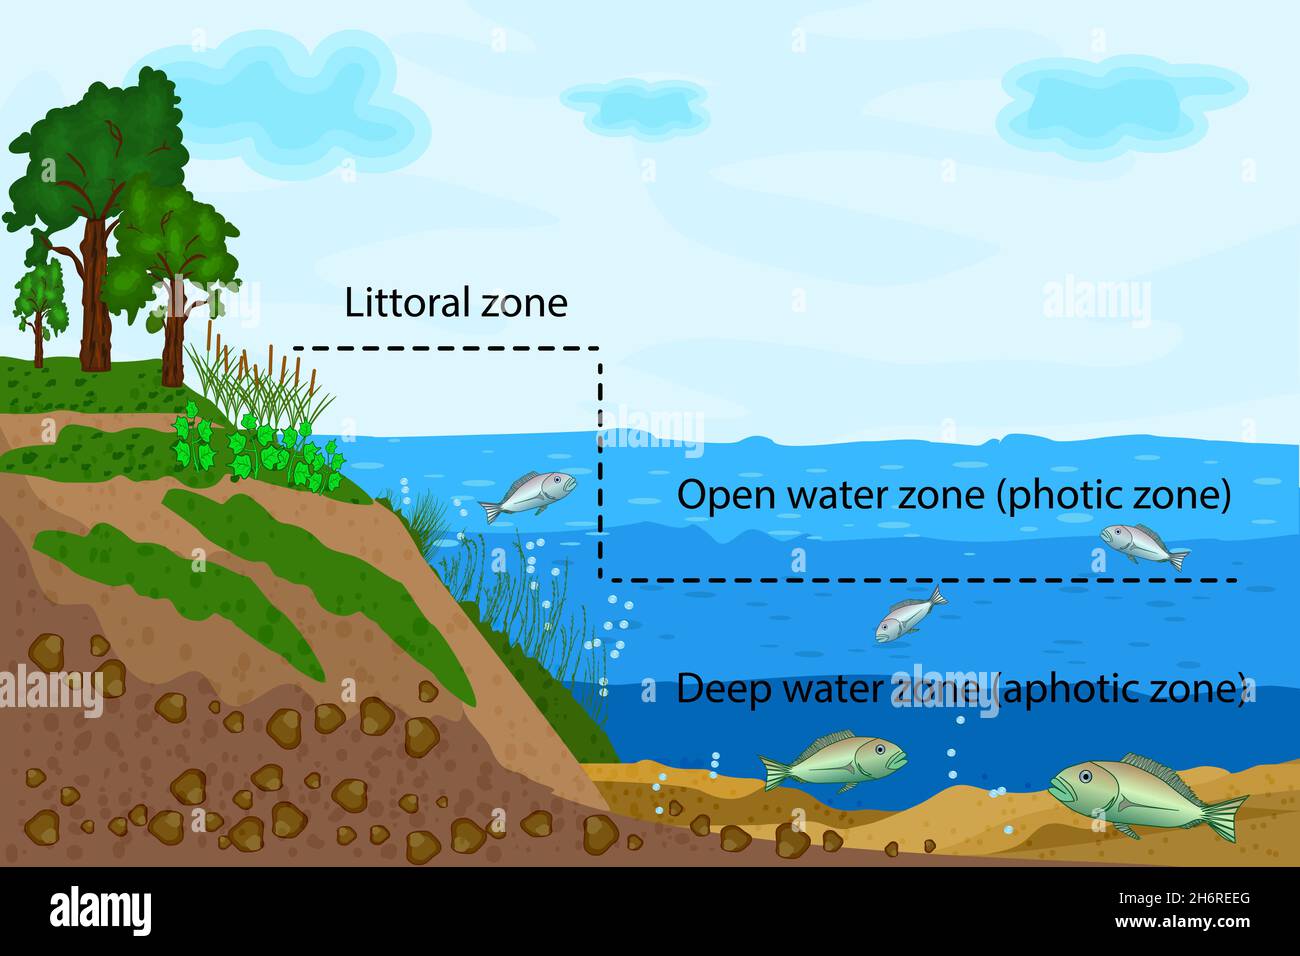 Lake ecosystem. Zonation in lake water. Pond or river freshwater zones diagram. Lake ecosystems division into littoral,open water and deep water zones Stock Vector